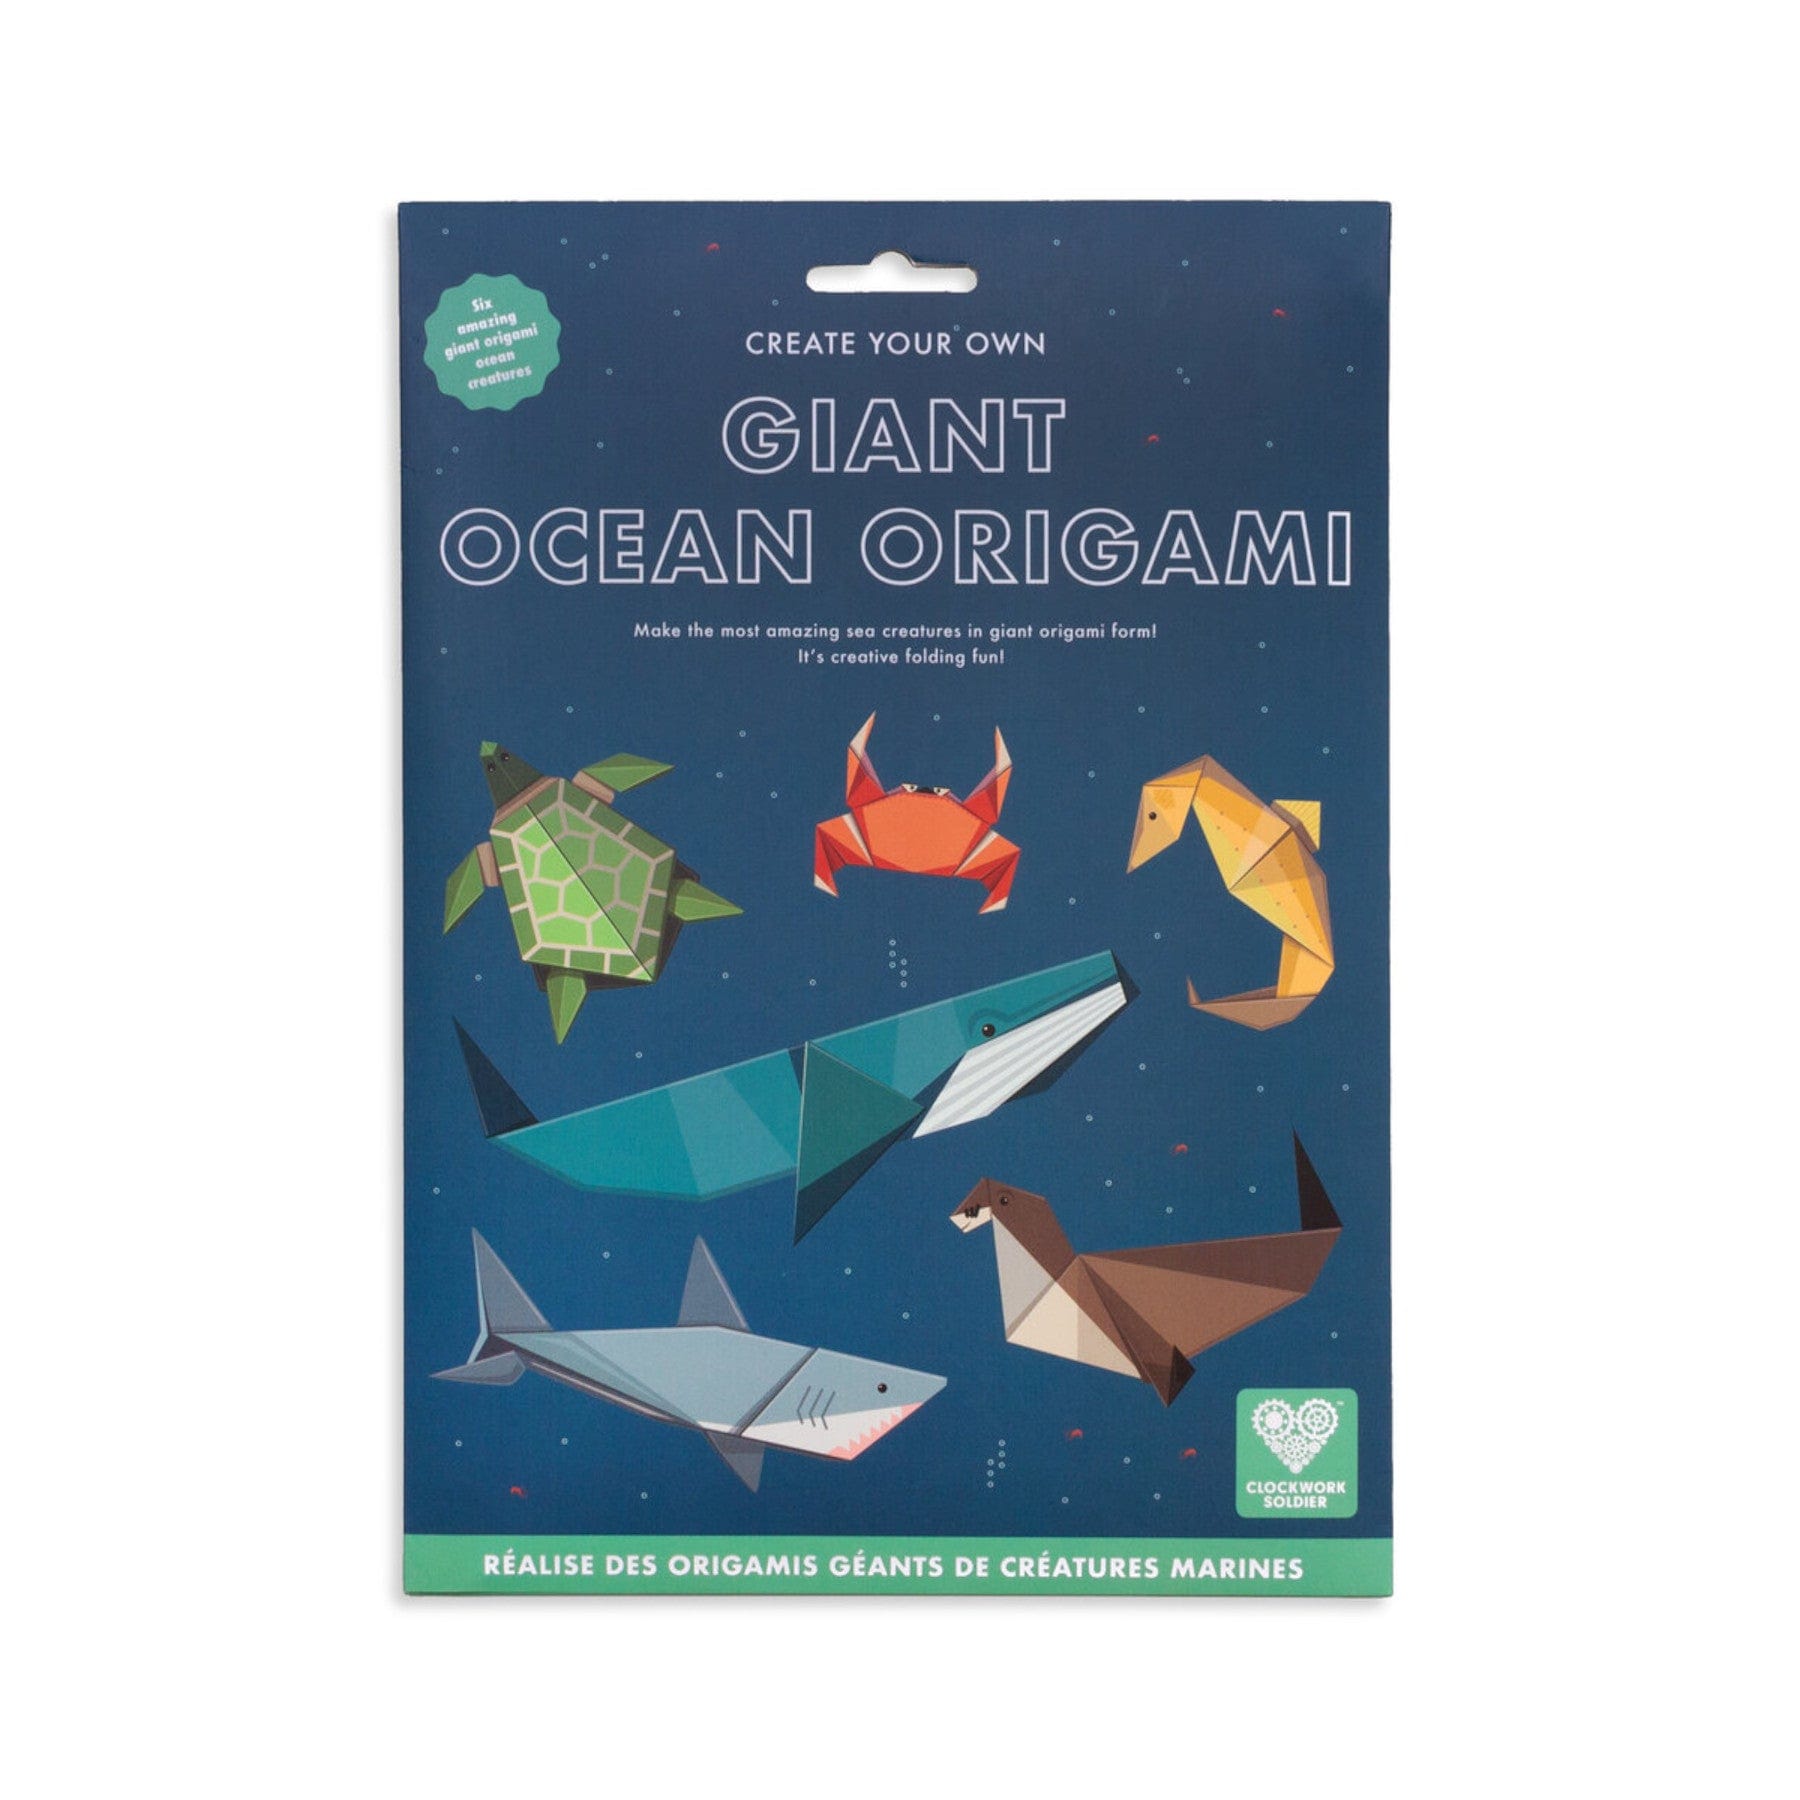 Giant Ocean Origami kit packaging with illustrations of folded paper sea creatures like turtles, crabs, whales, and sharks, with text promoting creative origami fun.